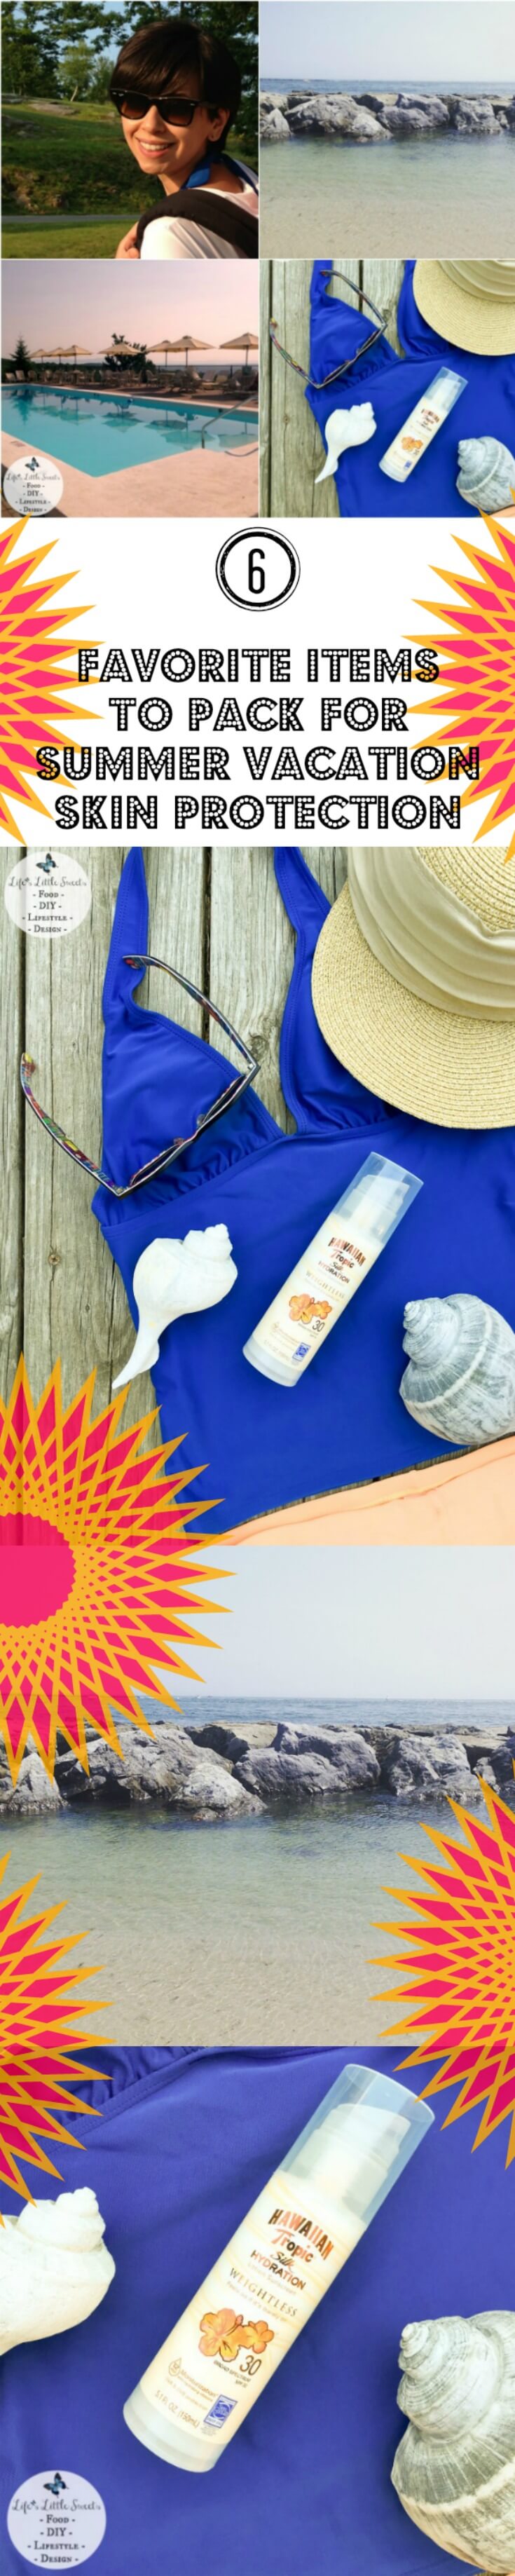 Here are 6 Favorite Items To Pack for Summer Vacation Skin Protection! Check out my favorite sun protection gear that I am bringing on my Summer vacation. I share New Hawaiian Tropic® Silk Hydration Weightless Lotion Sunscreen Pump as apart of what I will be packing for my Summer Vacation Skin Protection! Check out some photos of some of the places where I will be going! #CollectiveBias #ad #SummerSunCare